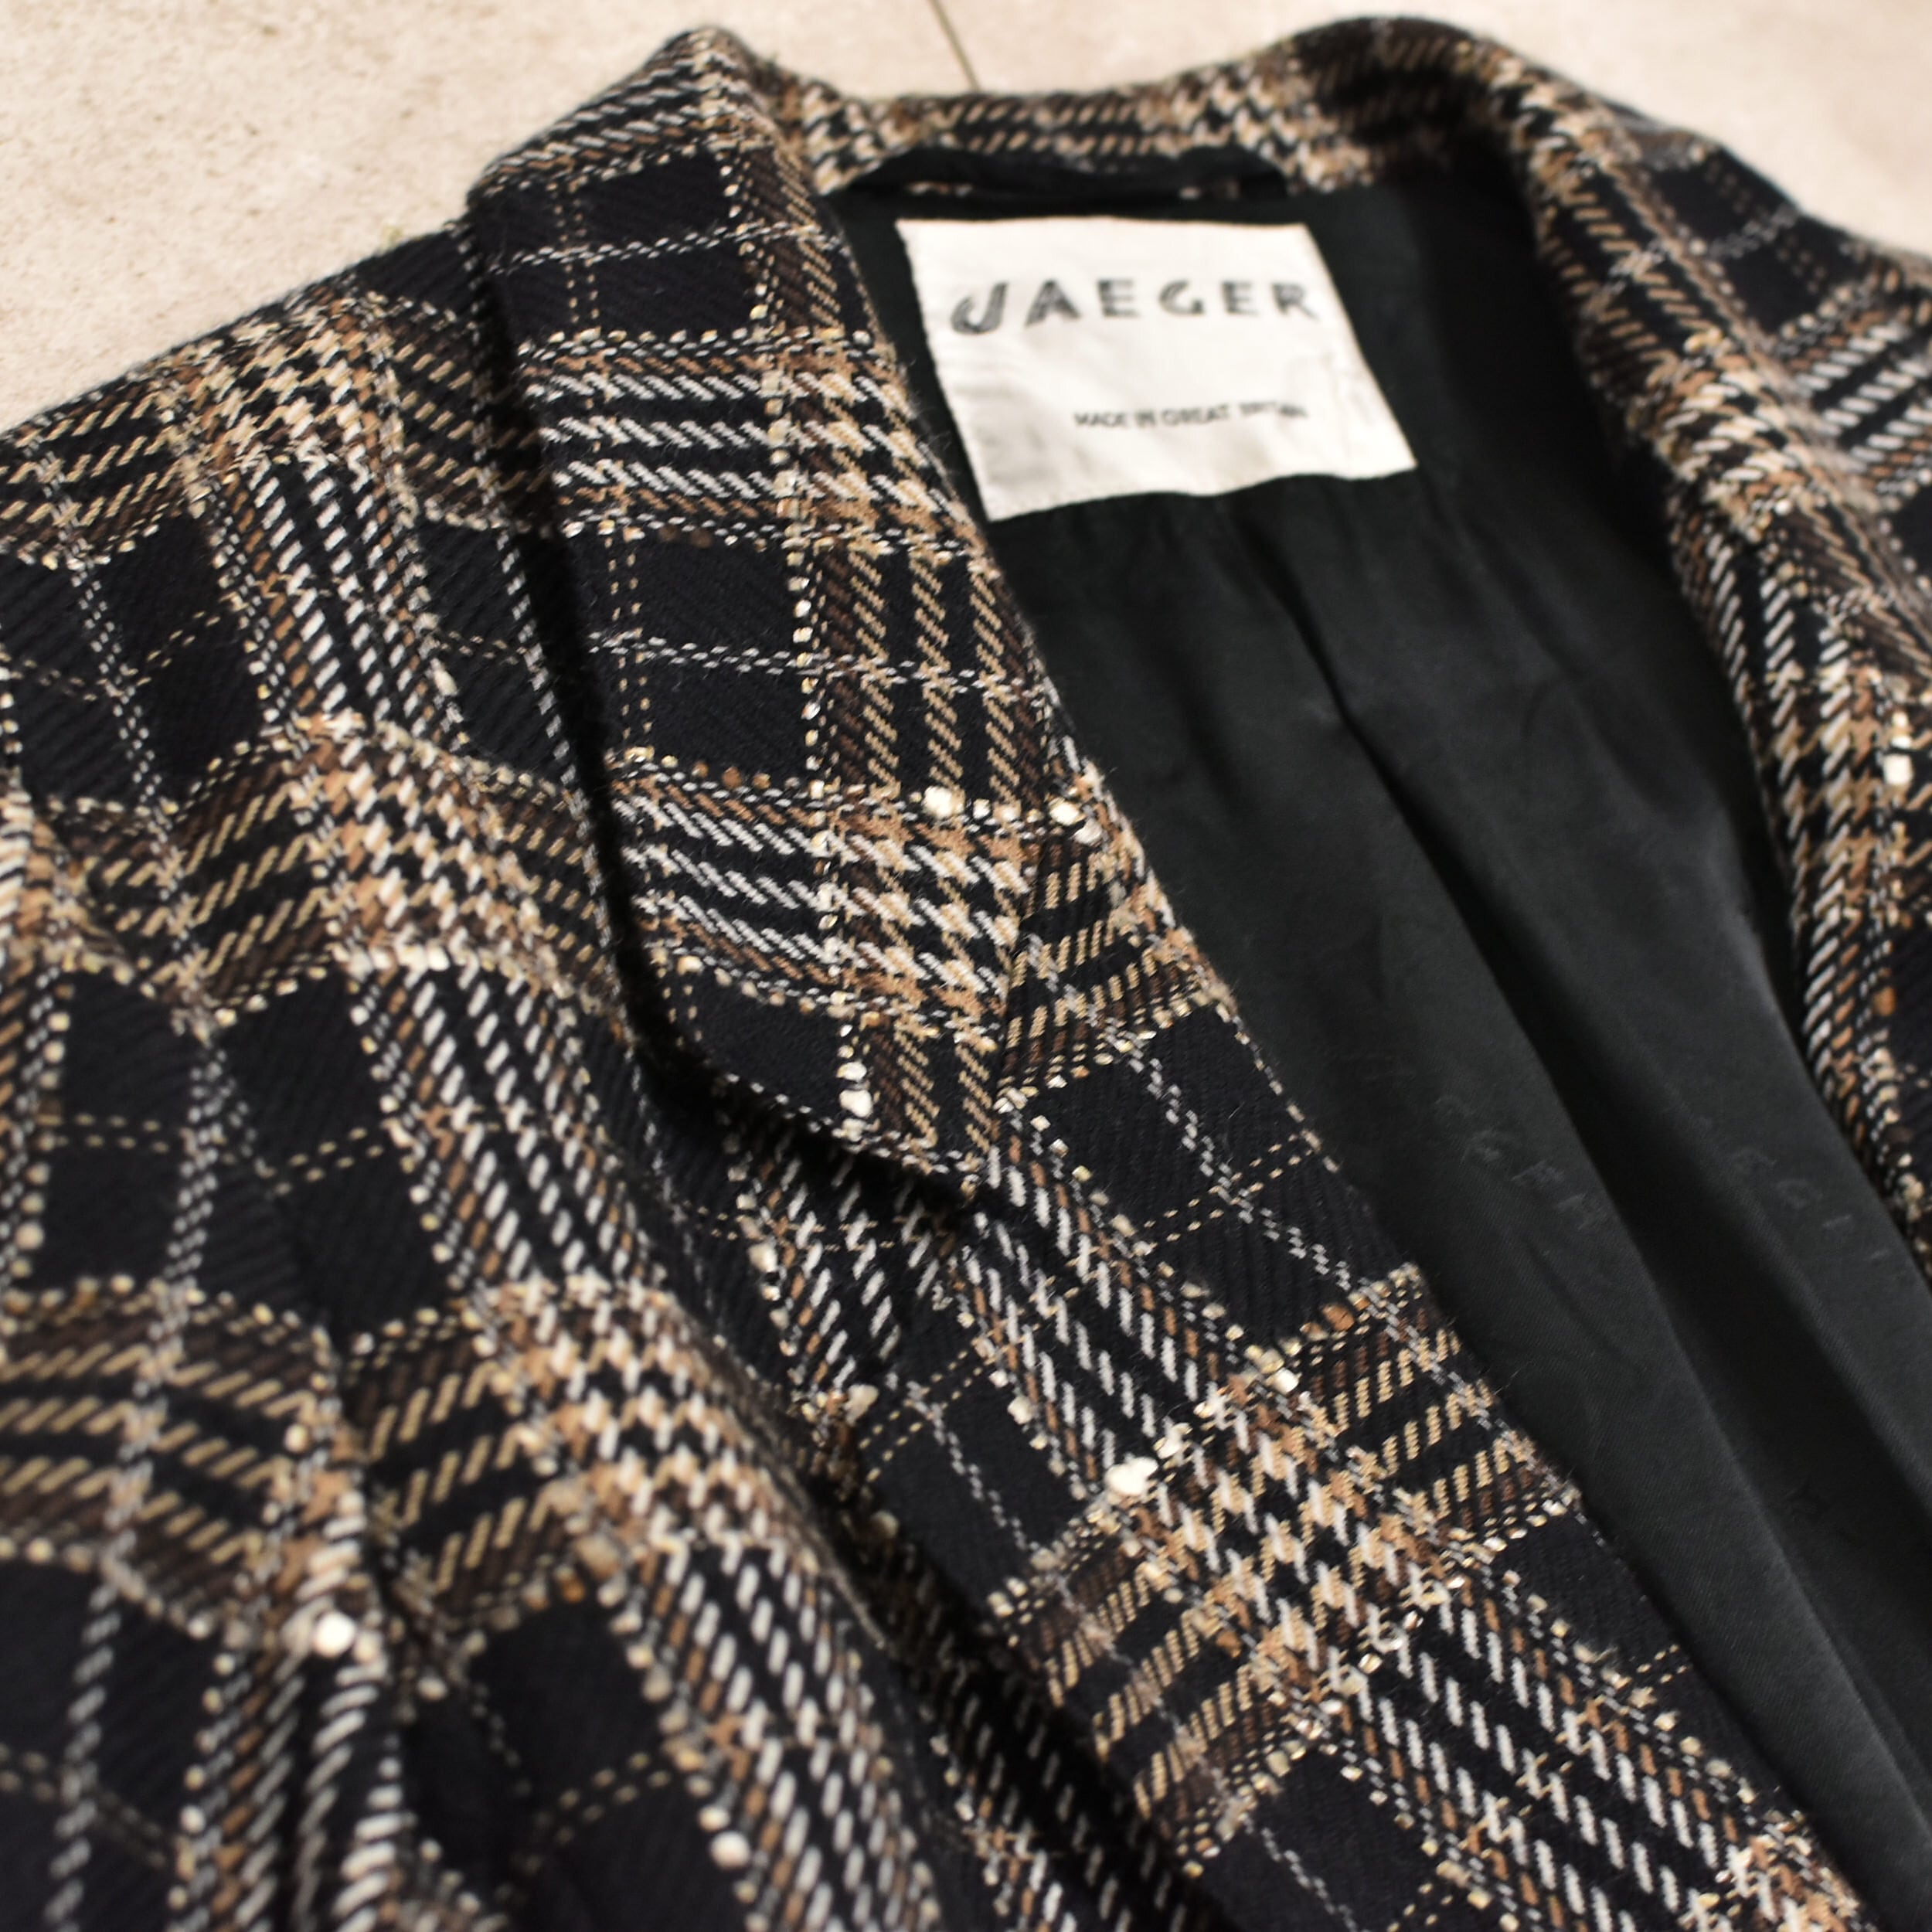 JEAGER tweed jkt Made in Great Britain | 古着屋 grin days memory 【公式】古着通販  オンラインストア powered by BASE